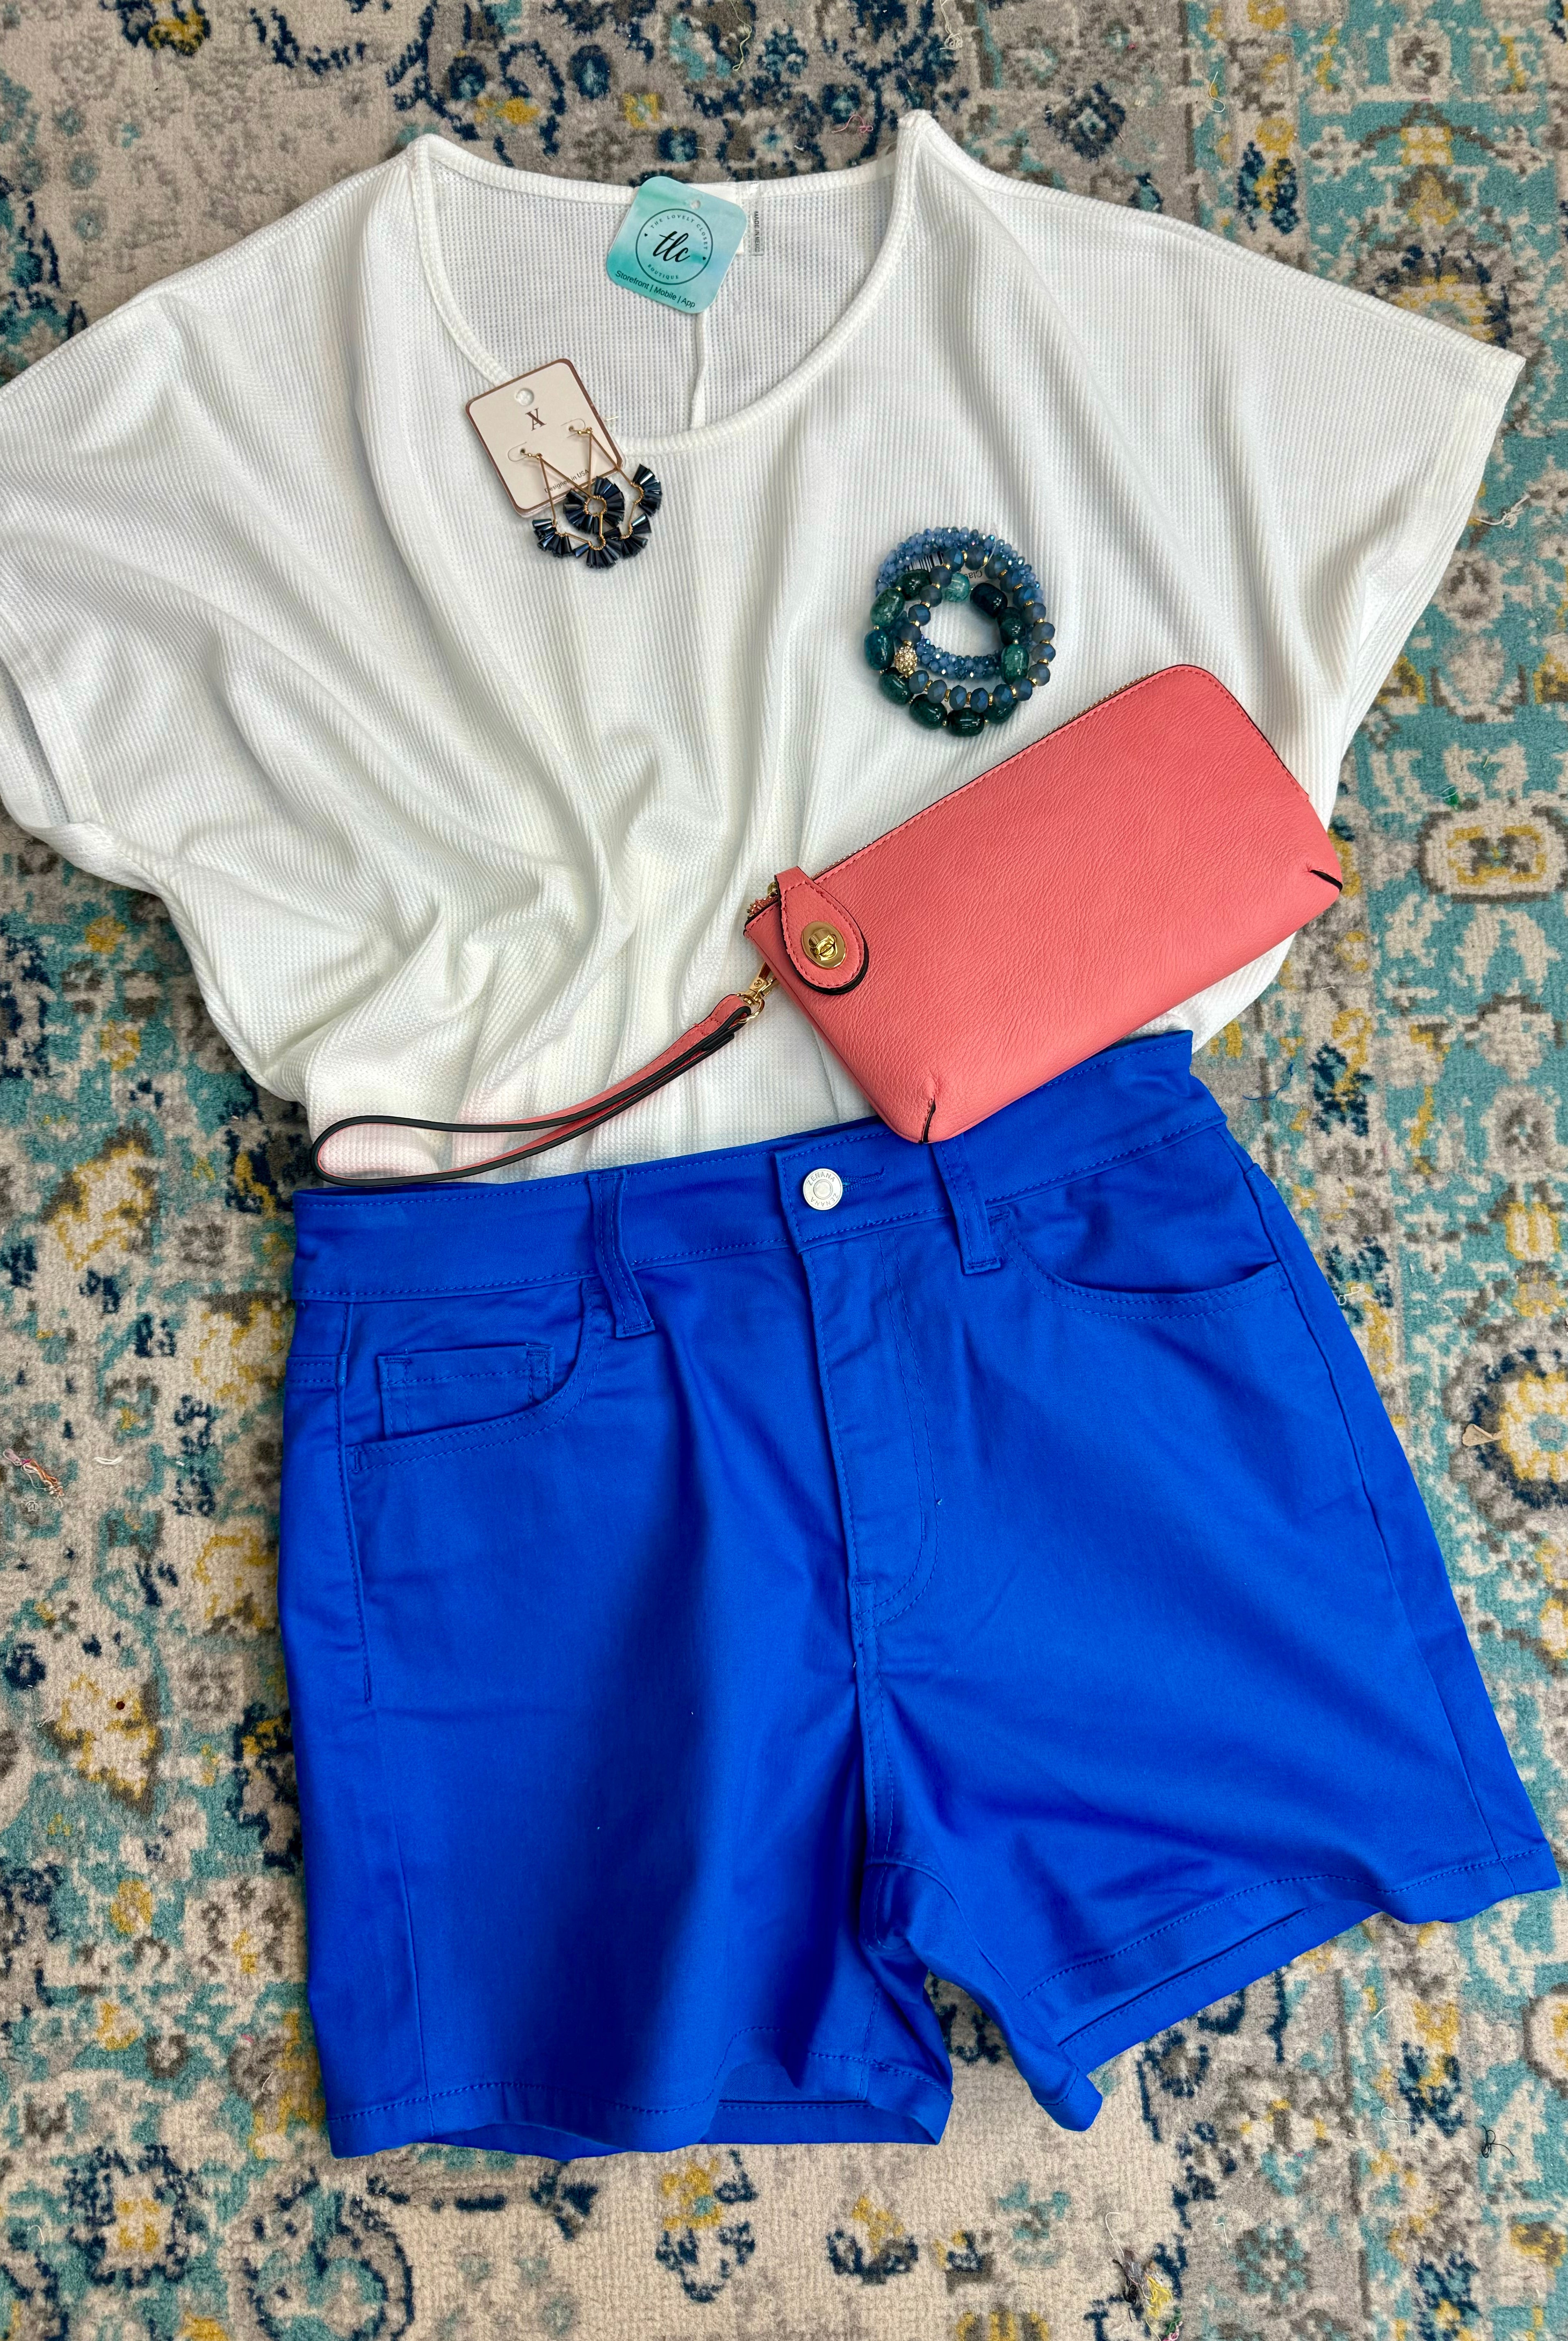 Ocean Blue Shorts-Shorts-The Lovely Closet-The Lovely Closet, Women's Fashion Boutique in Alexandria, KY